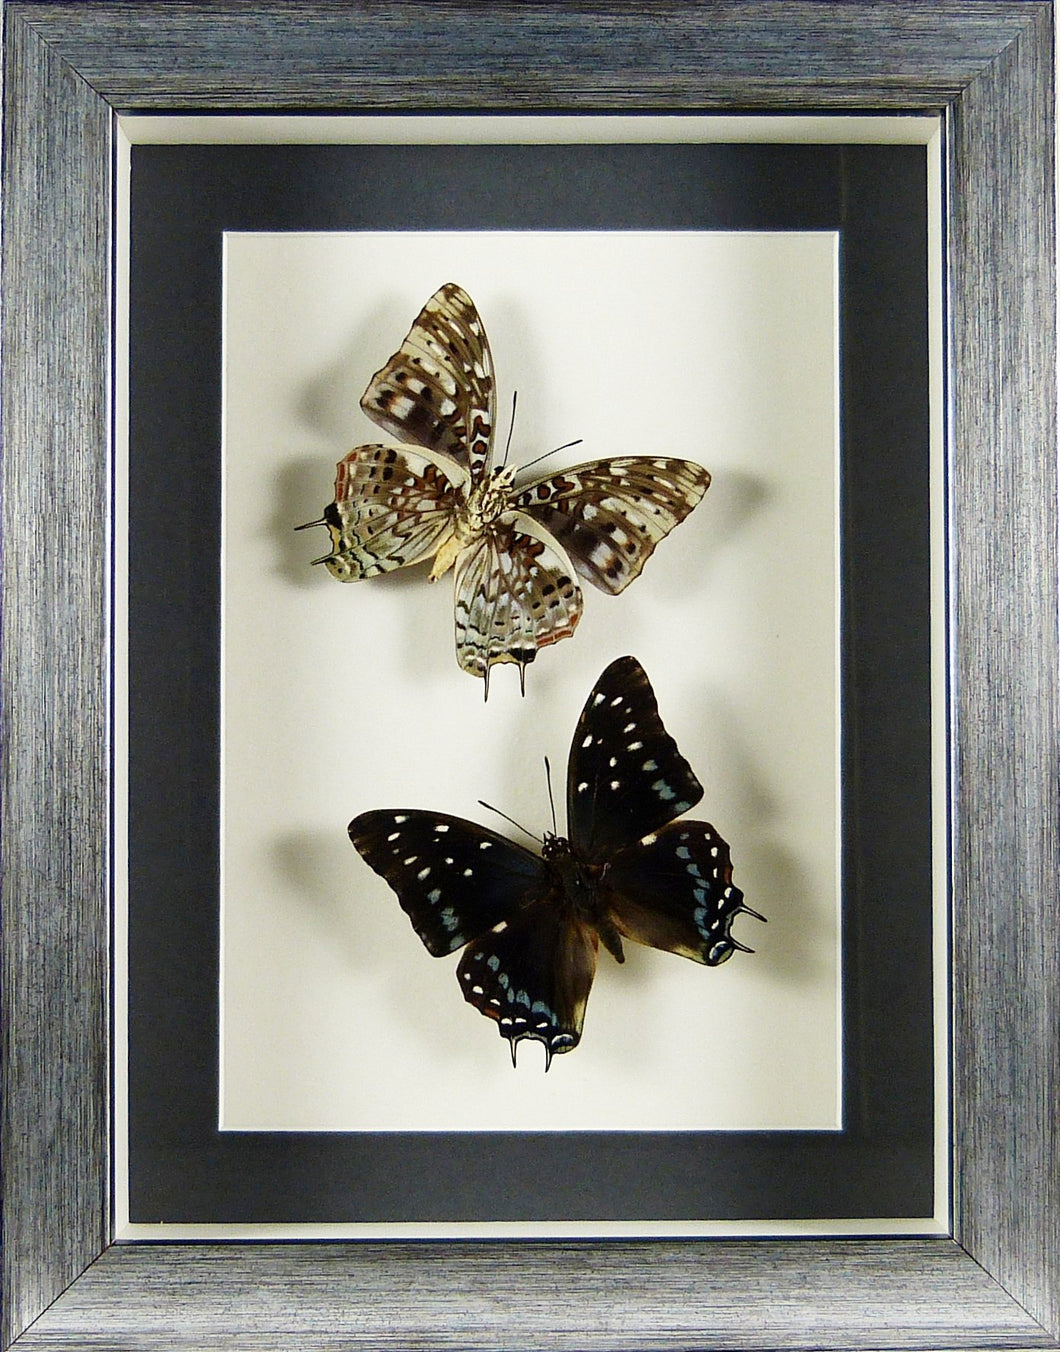 Papillons Charaxes etesipe recto & verso / Cadre argent